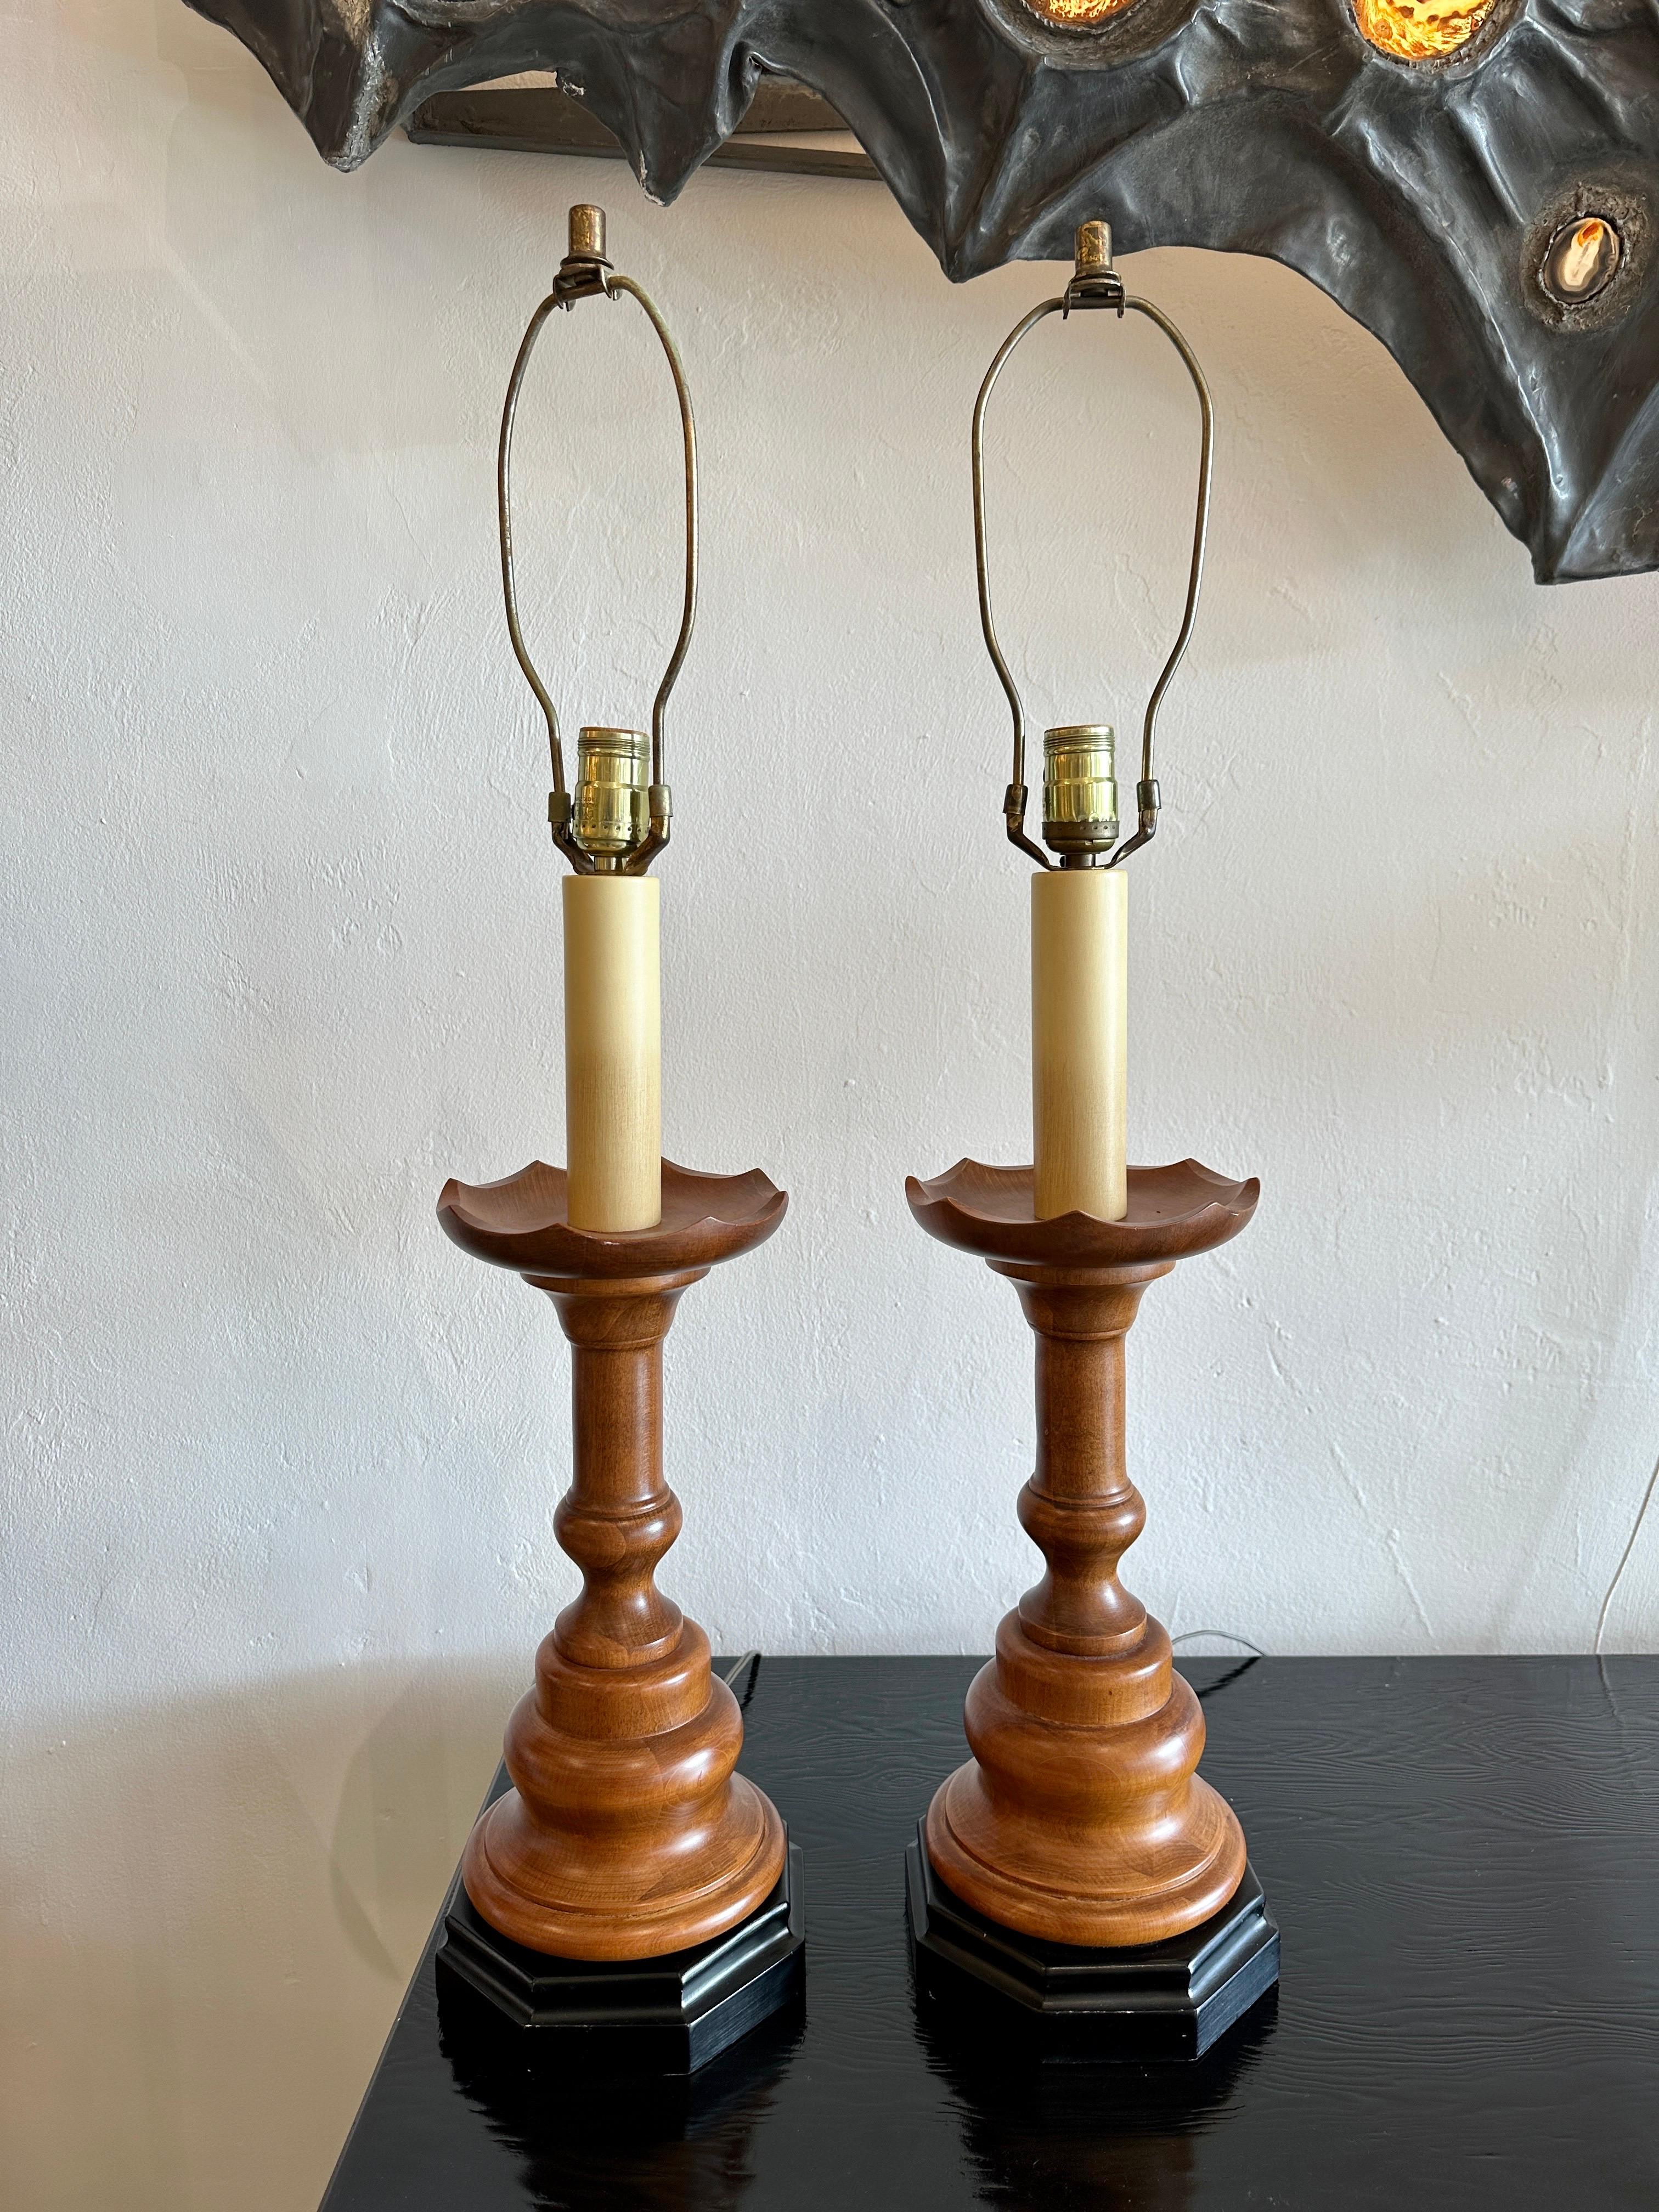 American Classical Turned Wood Lamps with Chess Pawn Design, Pair For Sale